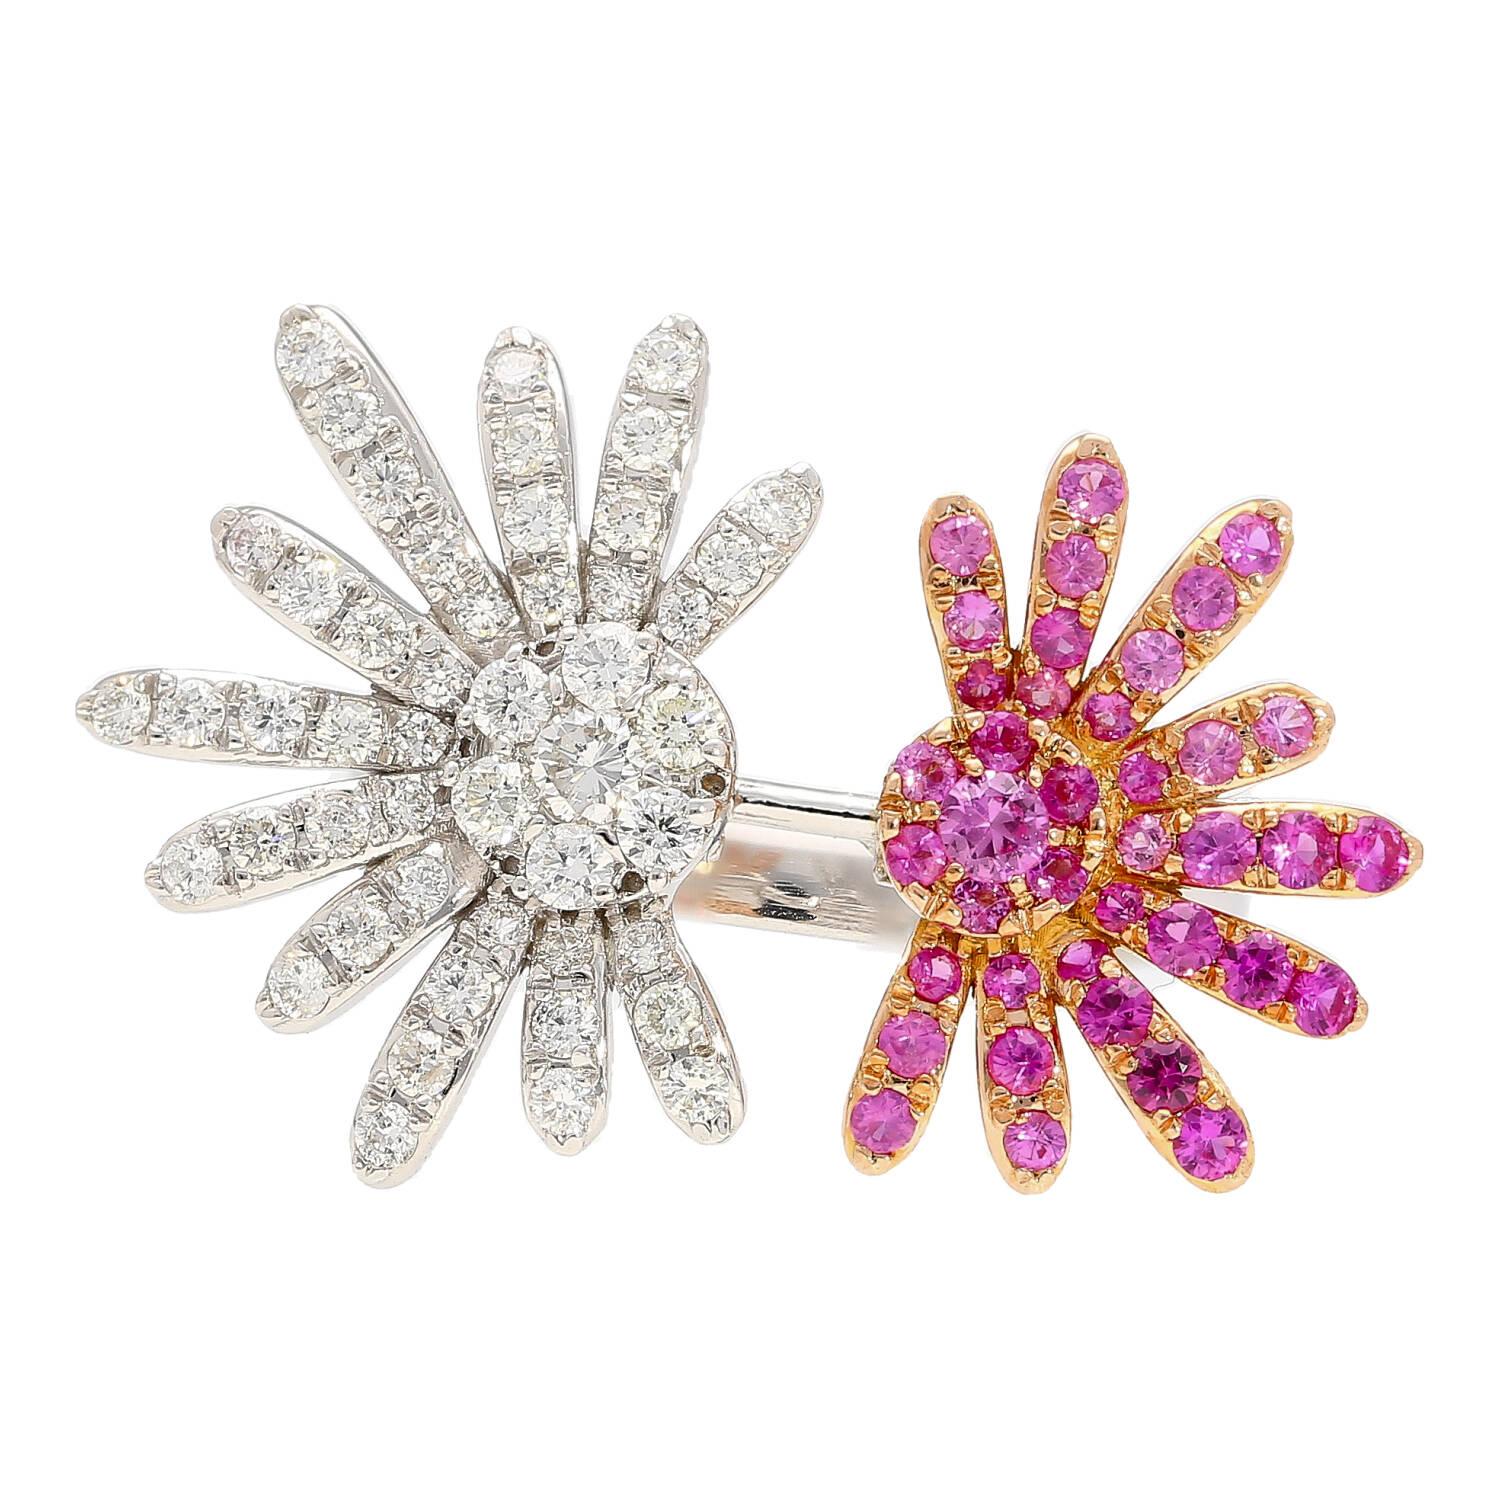 This exotic ring features both white diamonds and pink sapphires to create a truly eye catching display of design. The 49 round cut diamonds weigh 0.66 carats, and the 39 pink sapphires weigh 0.59 carats. This ring is set in 18k white gold, and all